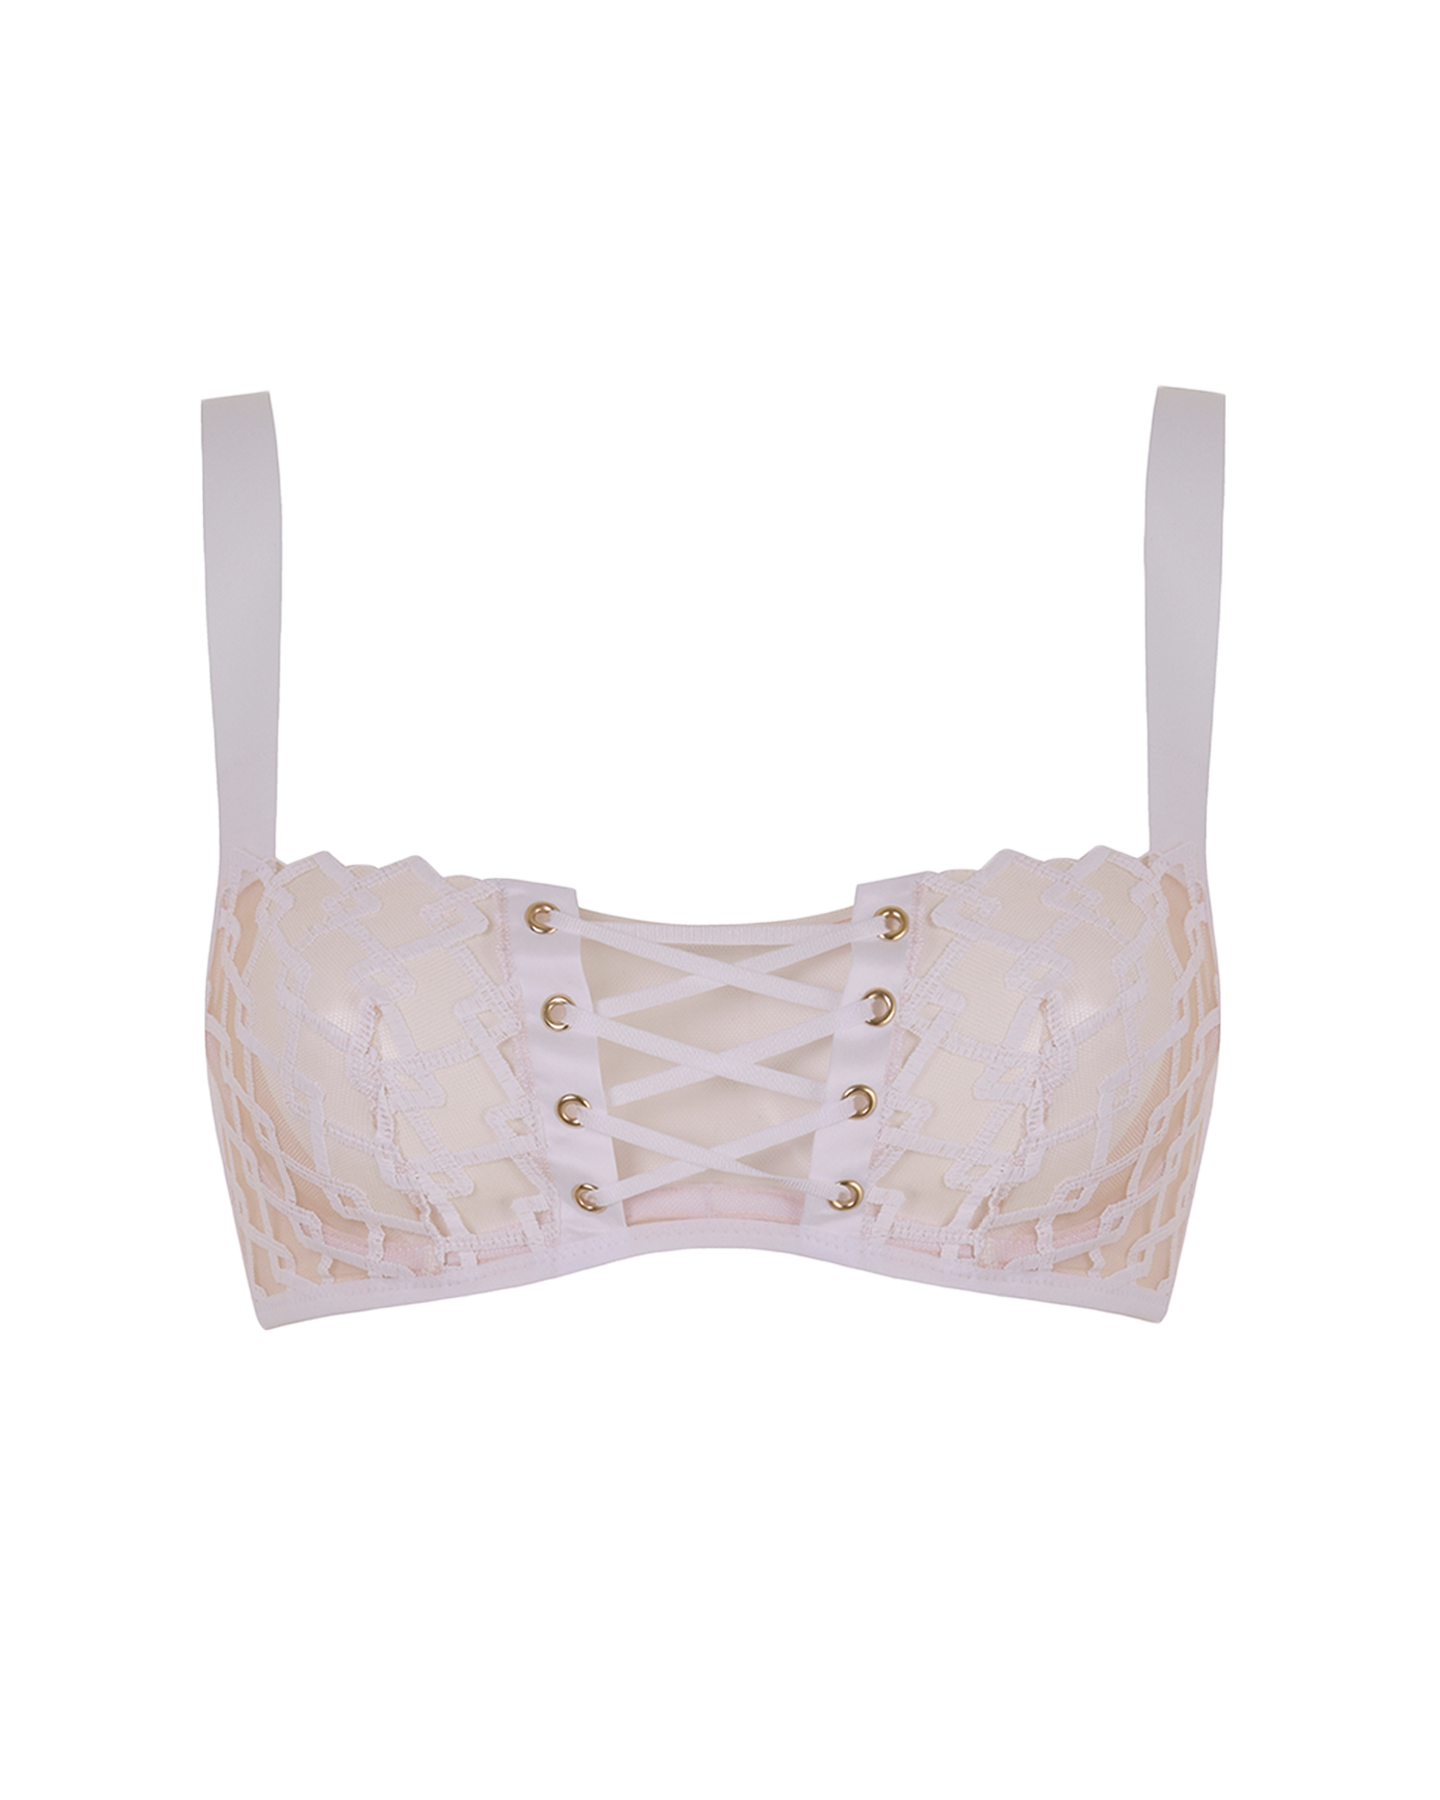 Kadra Full Cup Bra in White/Nude | By Agent Provocateur All Lingerie